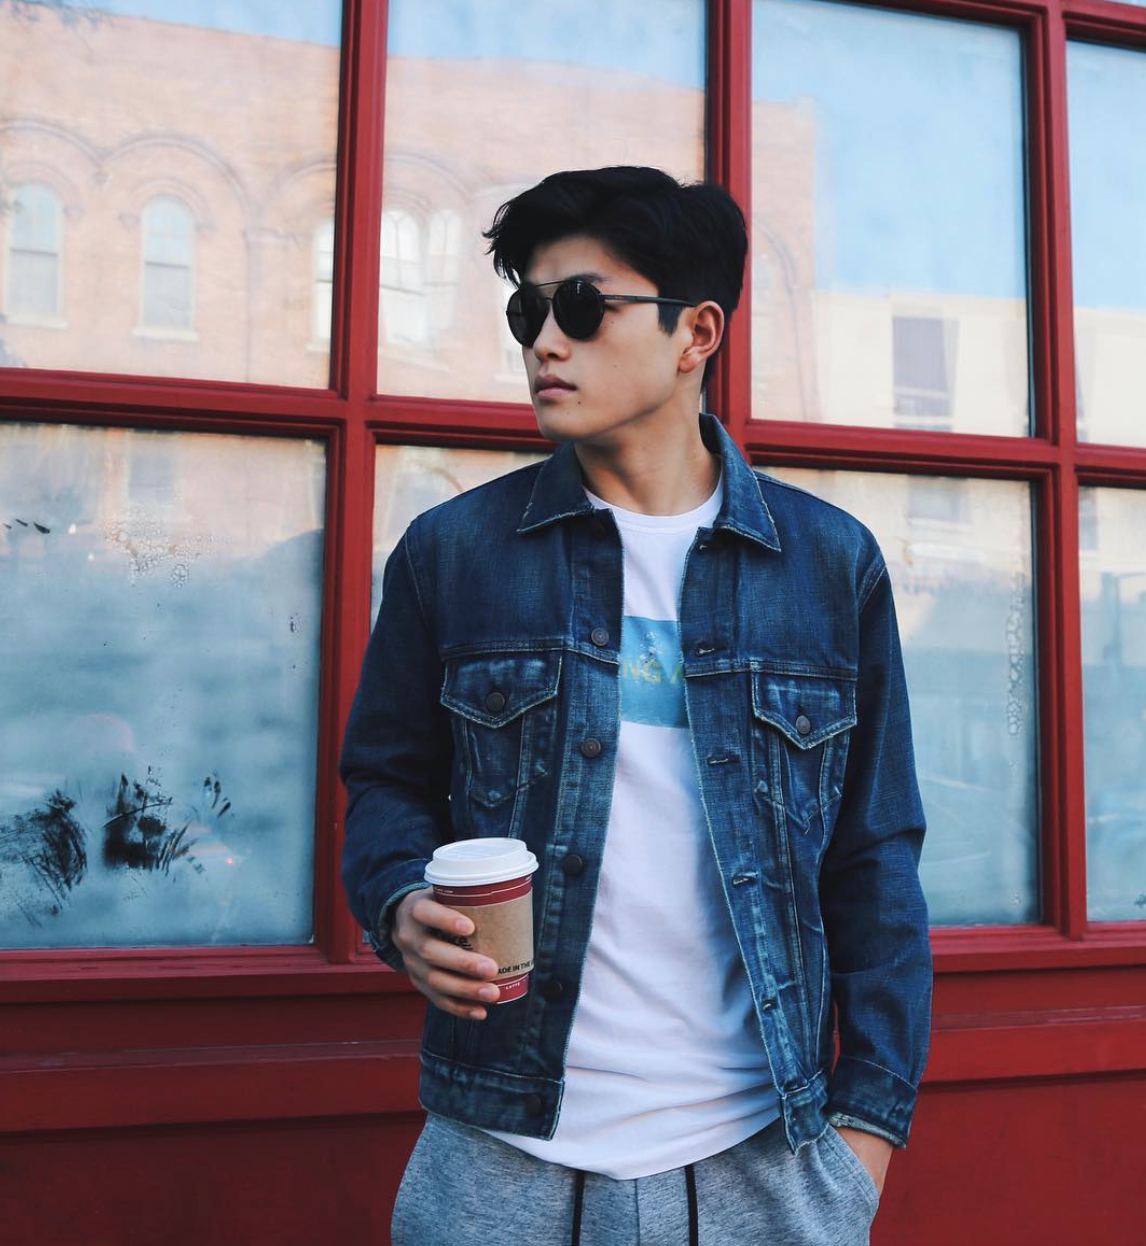 22 Reasons To Be Completely Obsessed With The Shib Sibs